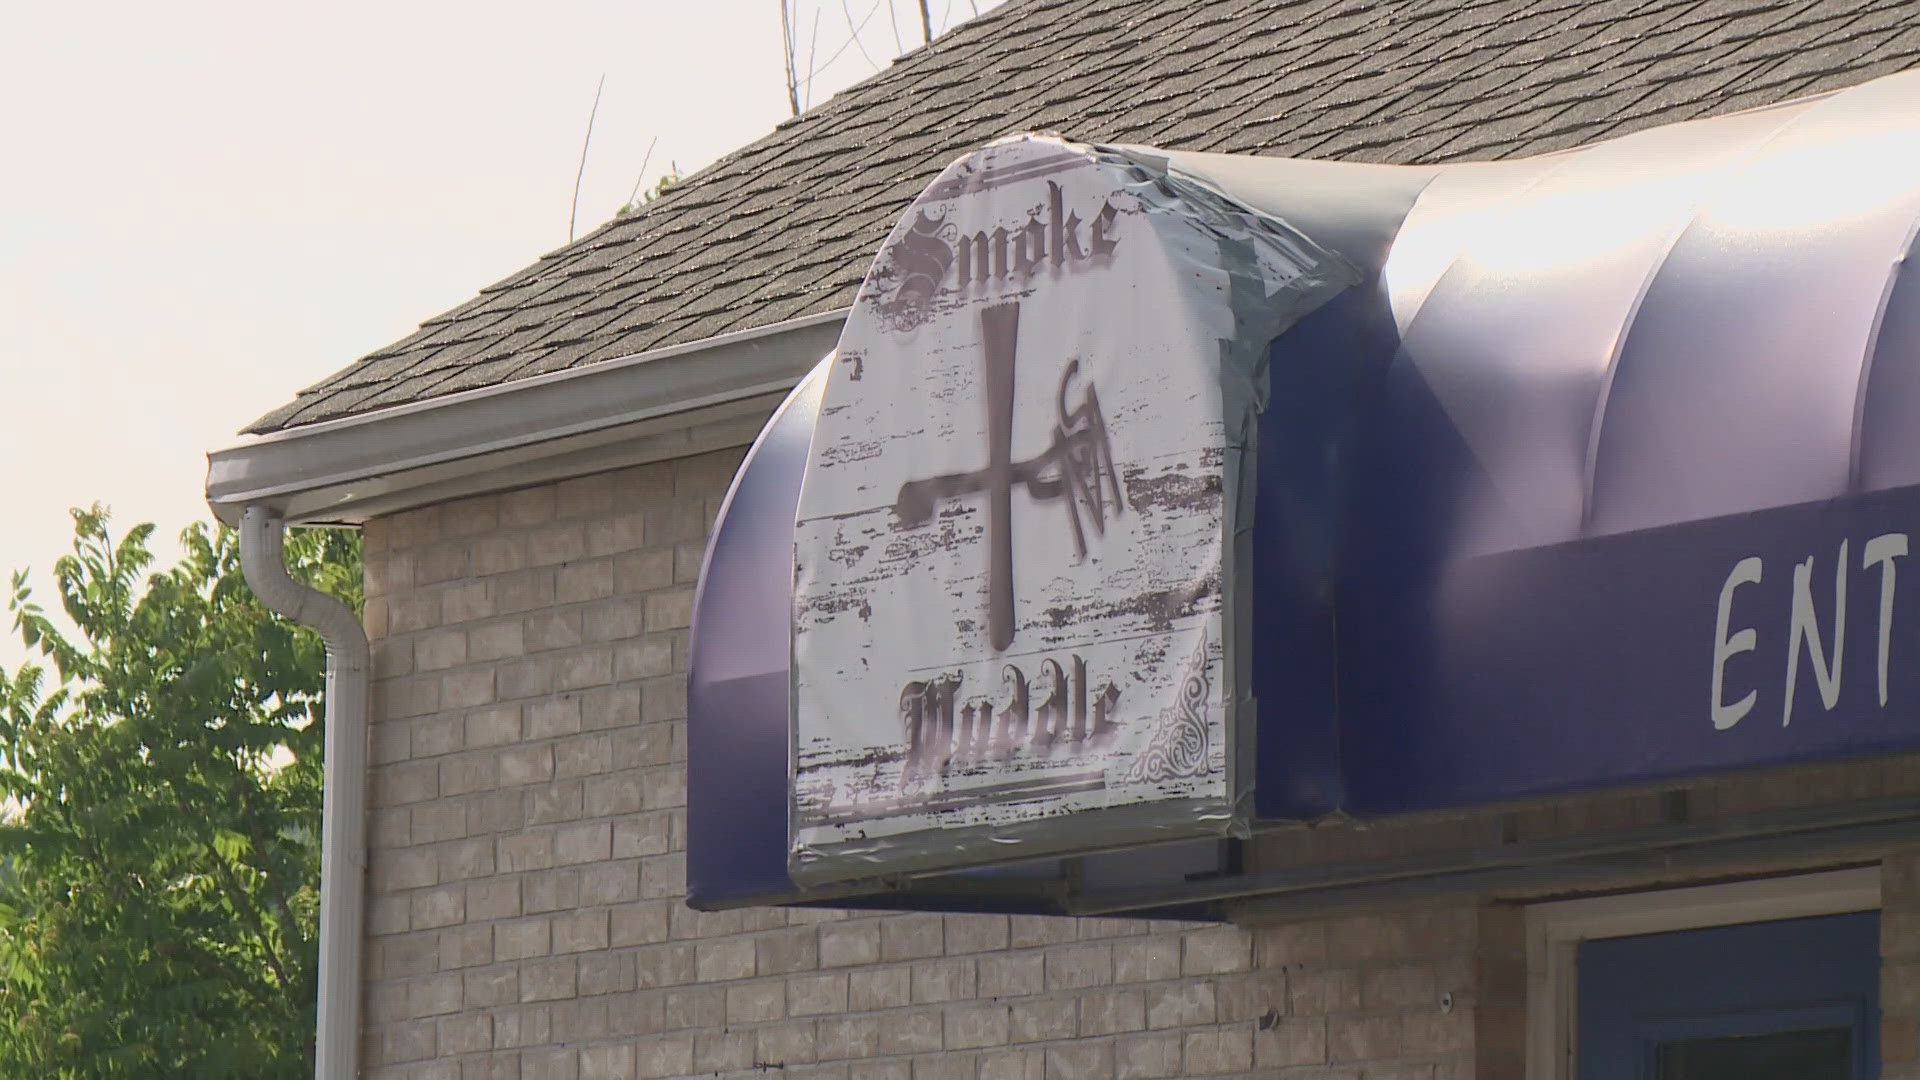 Smoke and Muddle located on Liberty Street will hold a fundraiser Friday to benefit the family of Trooper First Class Aaron Pelletier.